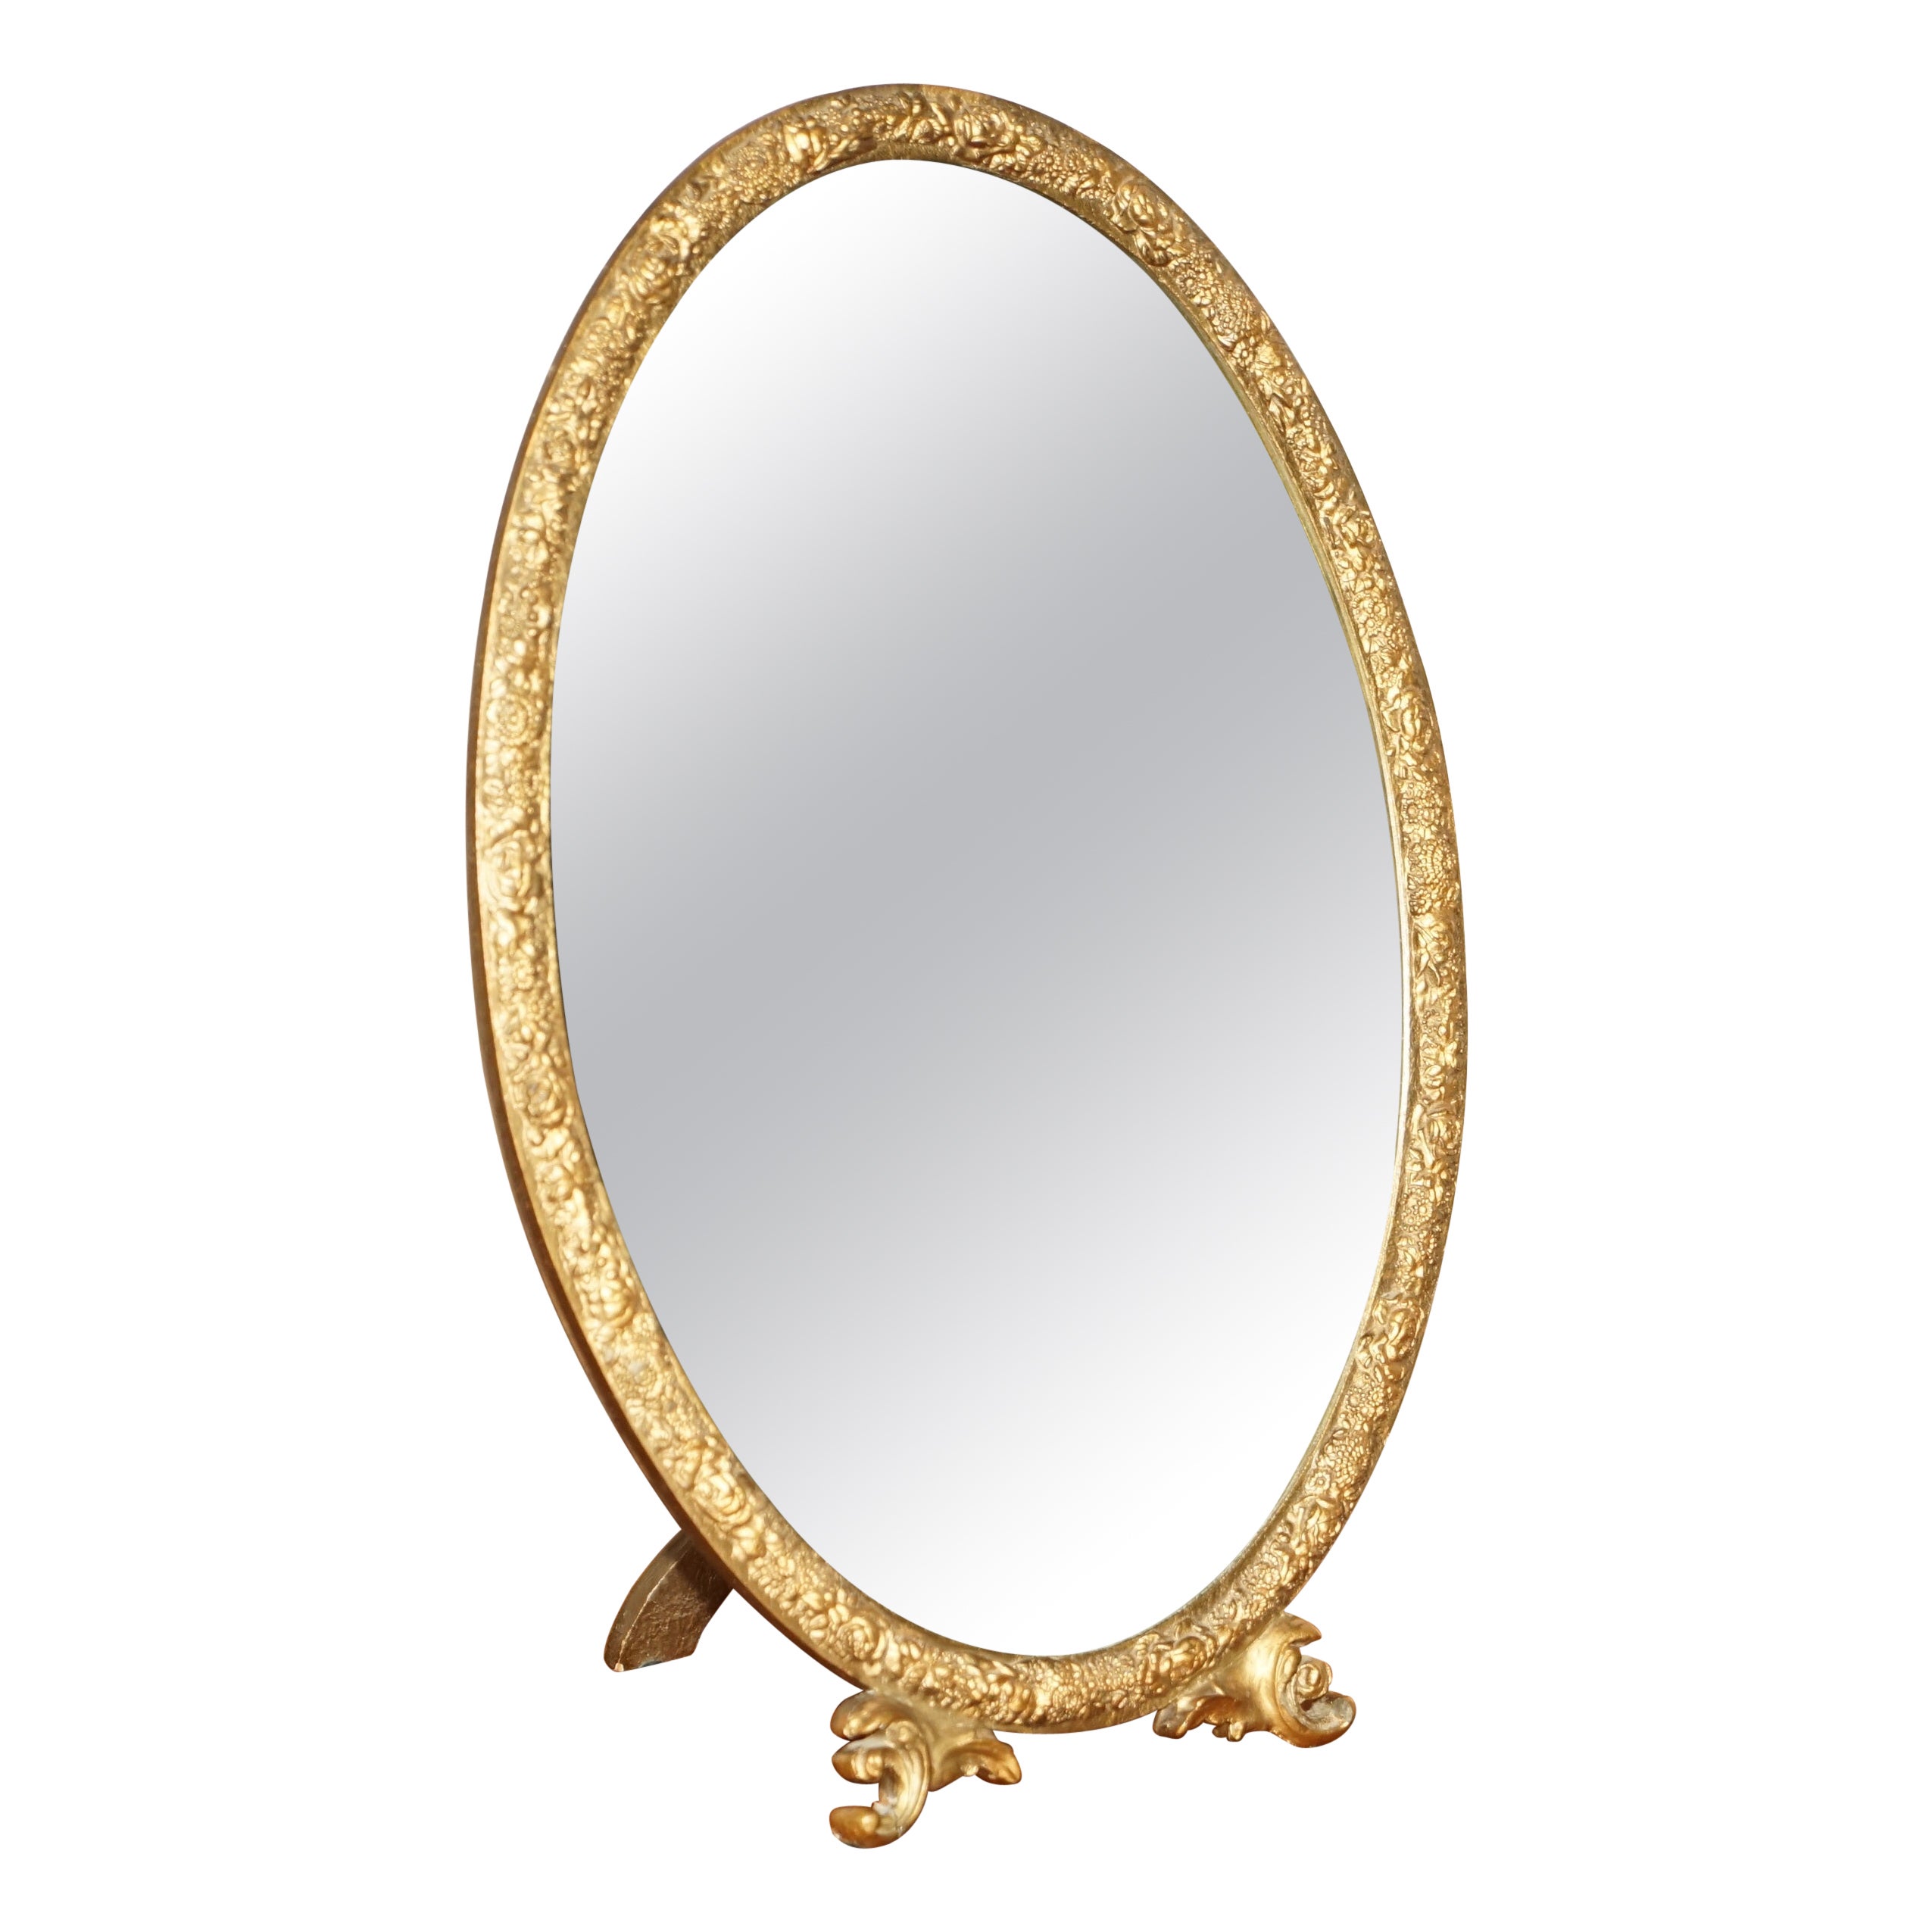 LOVELY ViNTAGE GILTWOOD FRAMED TABLE TOP MIRROR MIT STAND FOR A DRESSING TABLE im Angebot